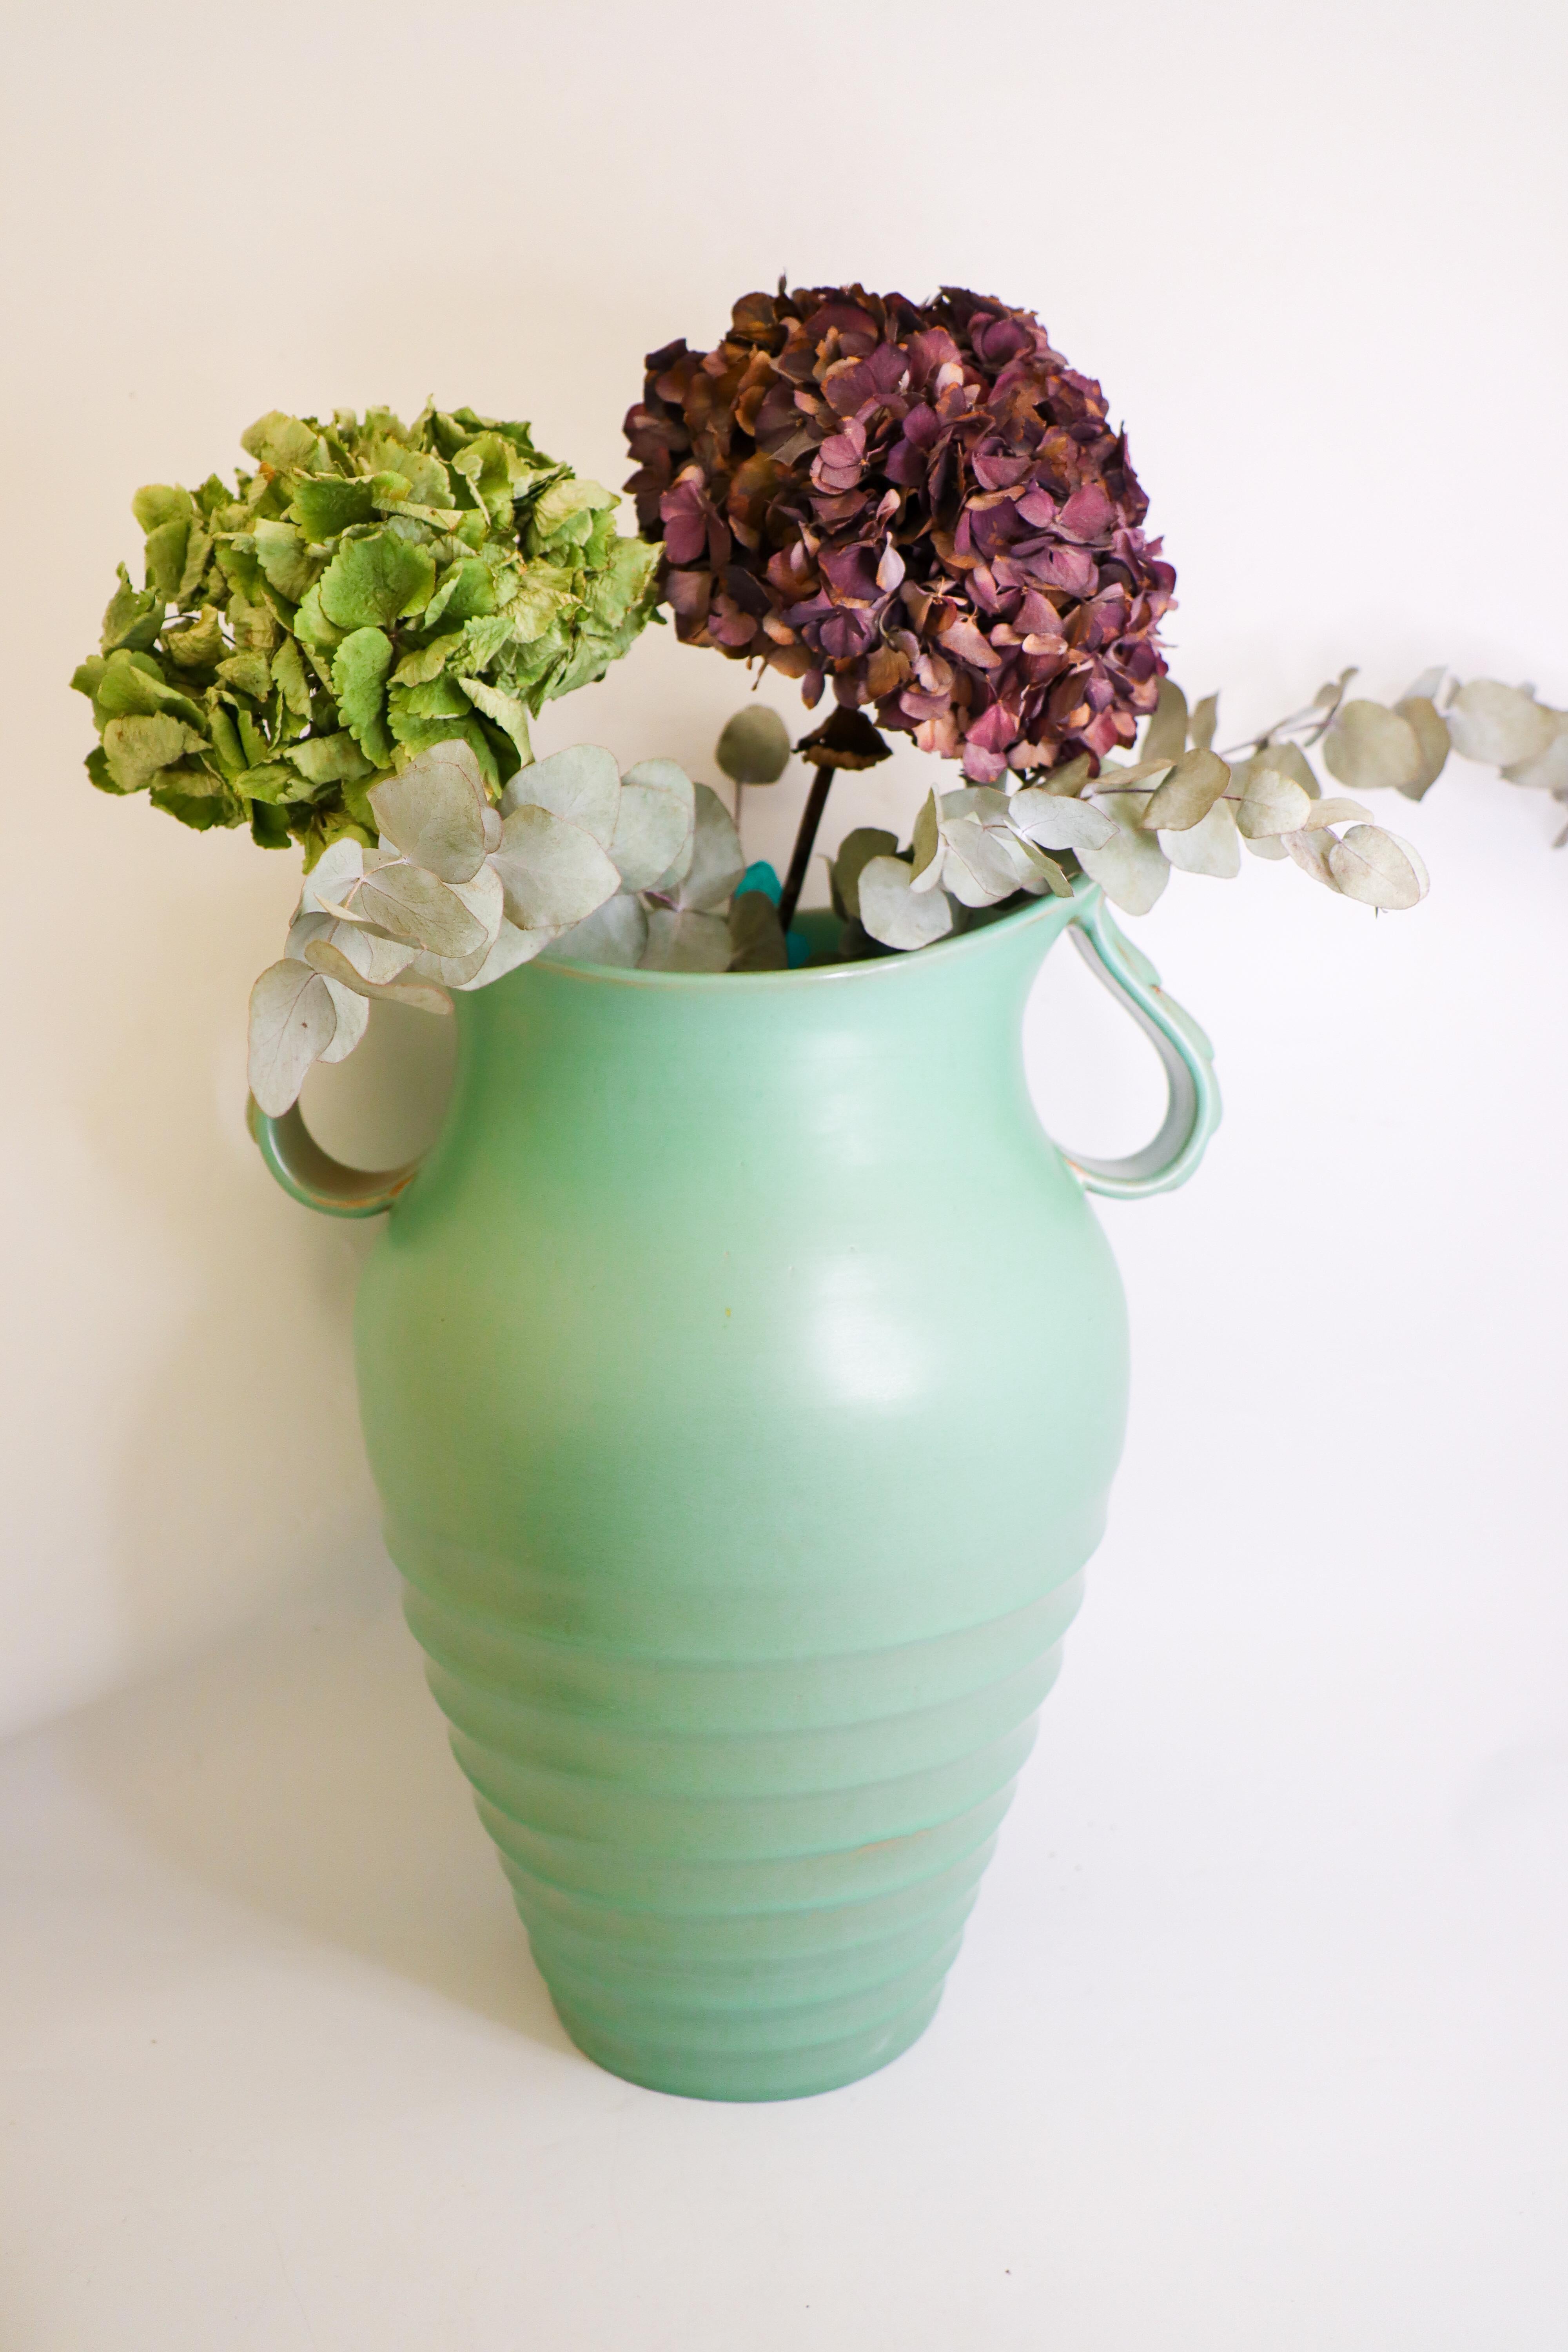 A large green floor vase designed by Ewald Dahlskog at Bo Fajans in Gefle in the 1940s. The vase is 44 cm (17,6